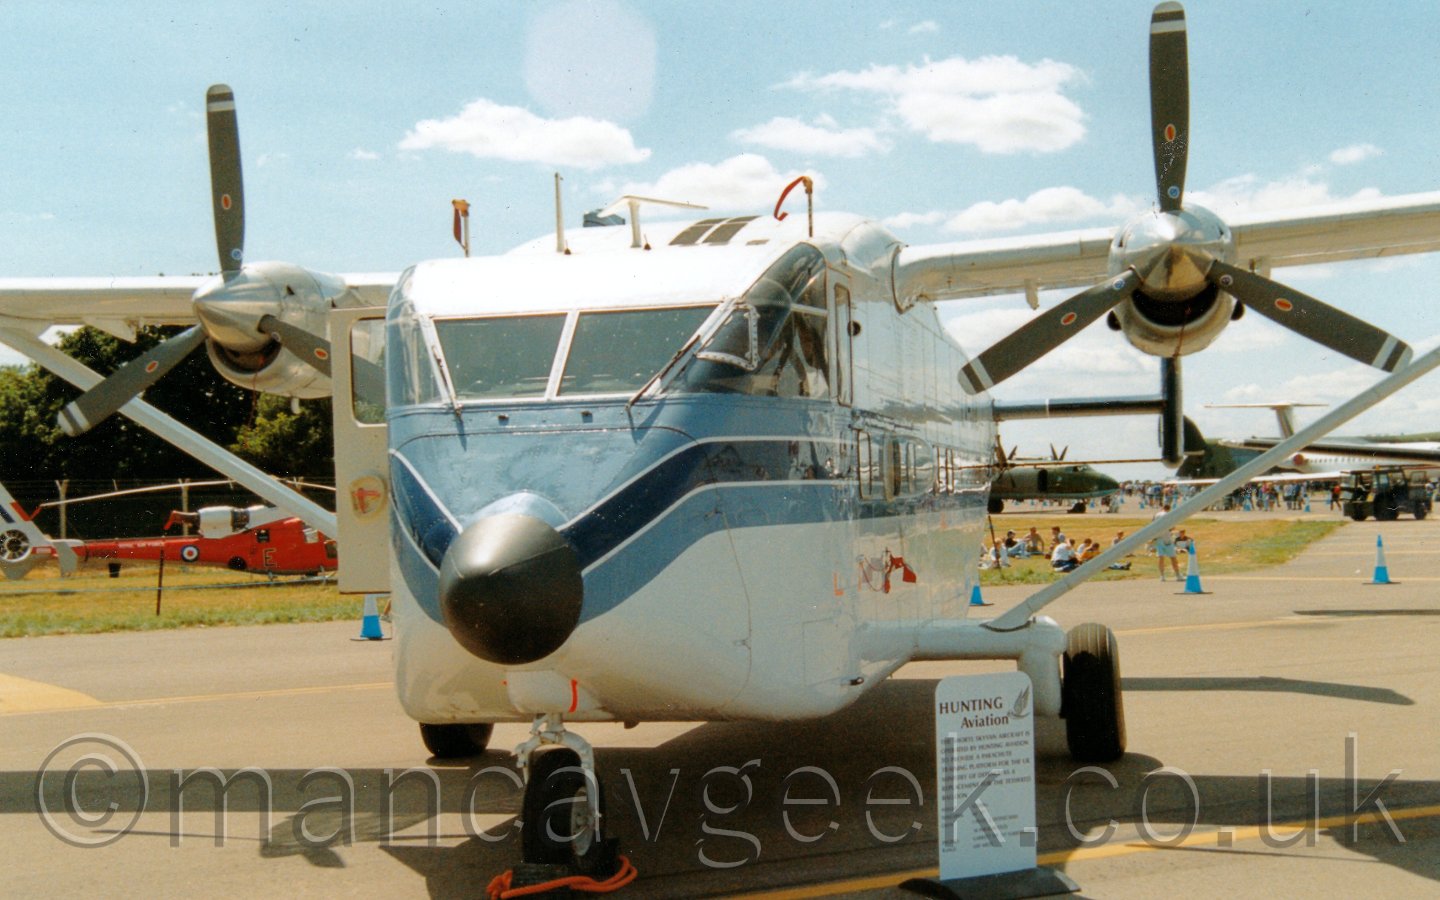 Front view of a high-winged, twin-tailed, twin propellor-engined cargo plane parked facing slightly off to the left of the camera. The plane is mostly white, with a light blue/dark blue/light blue stripe running along the body from the nose. There is a small sign giving a description of the plane on the ground by the nose in front of the left main wheel. In the background, a red helicopter is visible in front of trees on the left of the frame, while several green or white transport aircraft are visible on the right. Above and behind it all the sky is a gorgeous blue, with lots of fluffy white clouds here and there.